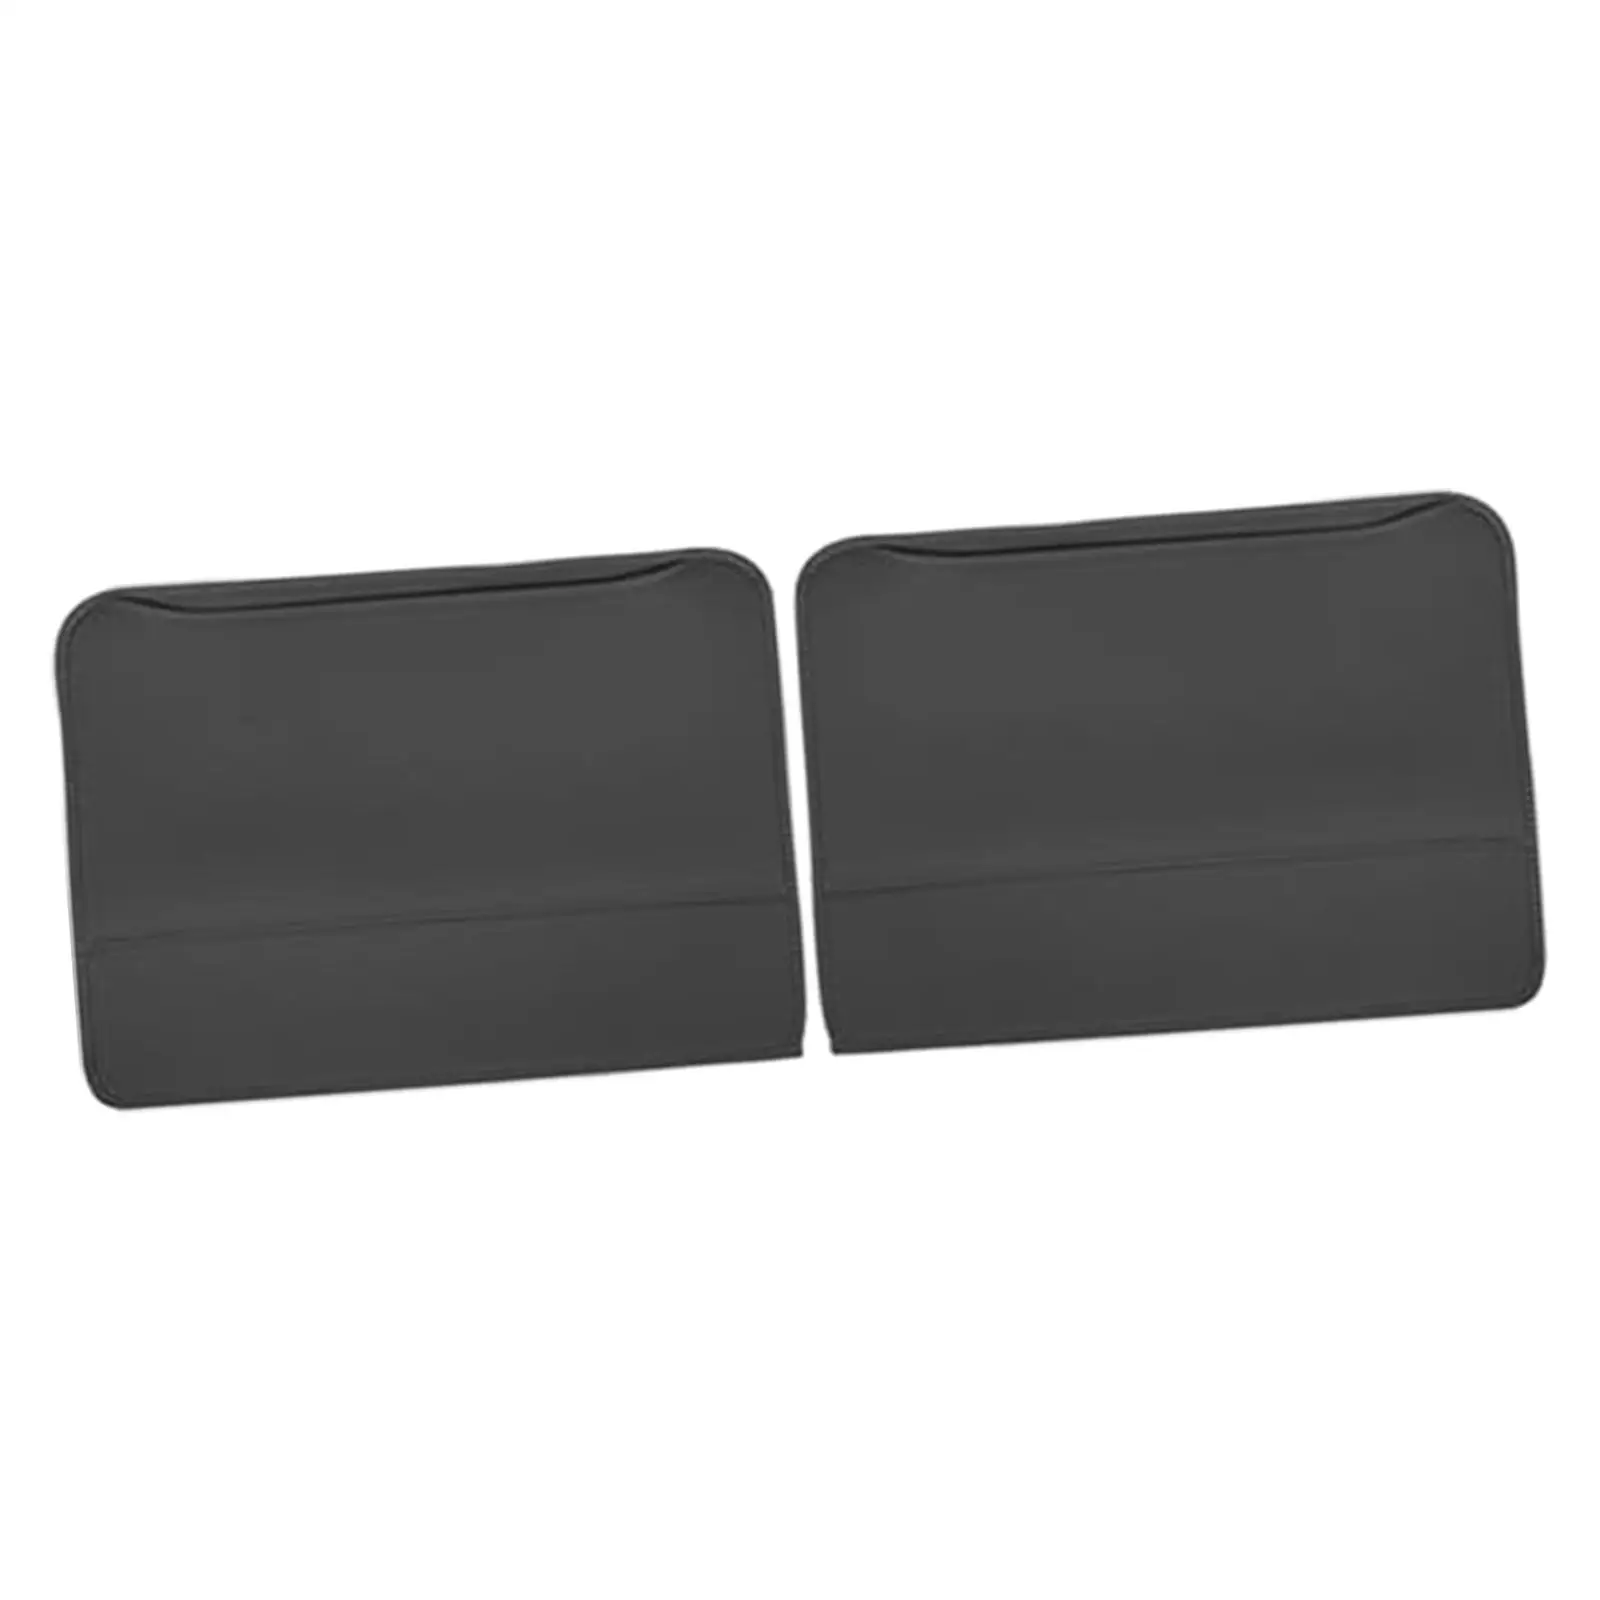 2x Seat Back Kick Mats Anti Scratches Prevent Dust and Trampling Car Back Seat Pad Cover Backseat Protector for Byd Seal